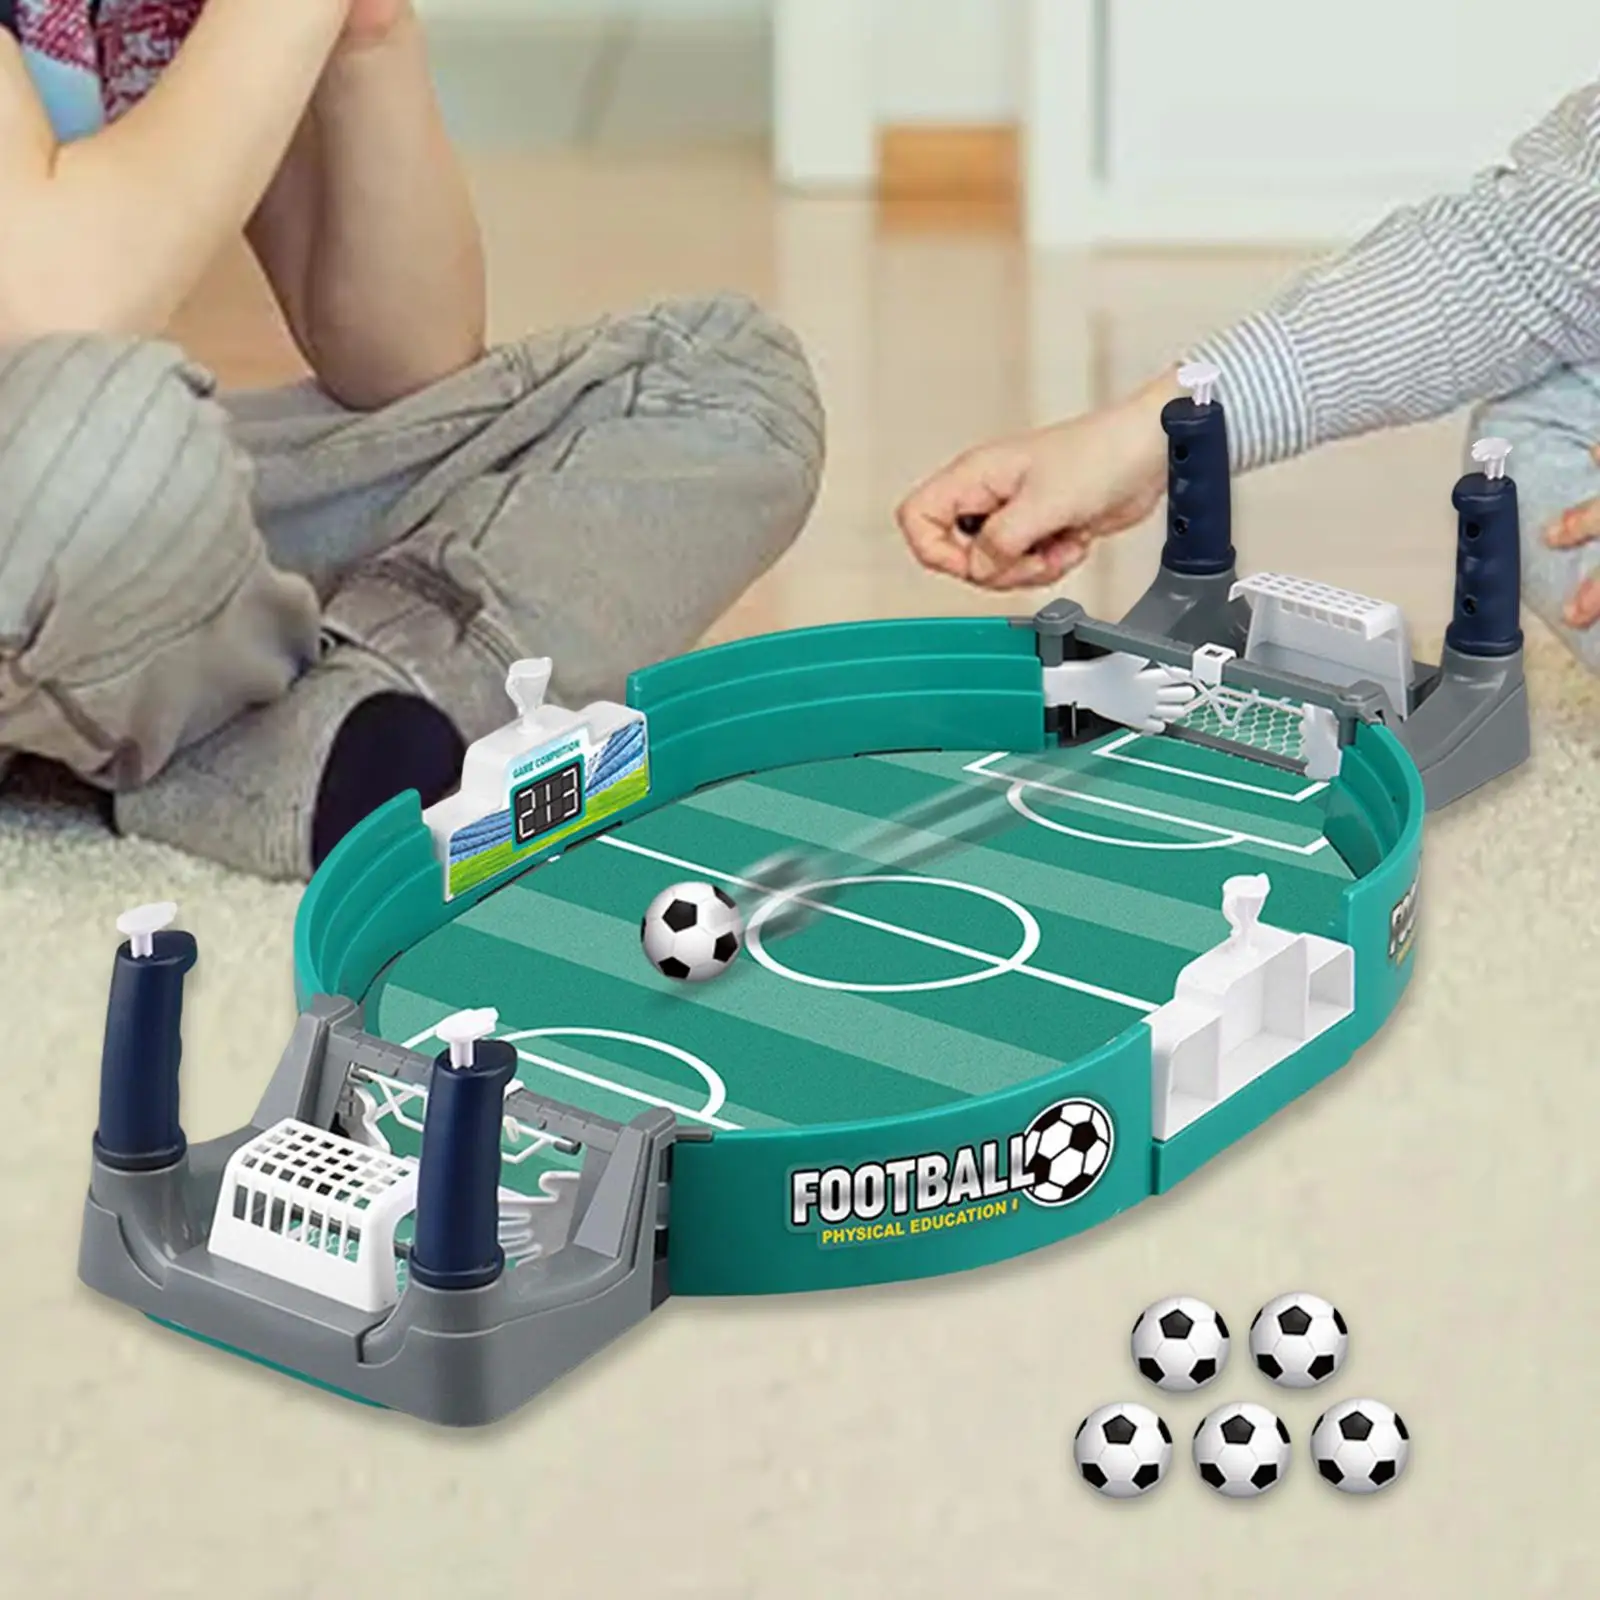 Soccer Football Games Interactive Toy for Rooms Parties Family Night All Ages